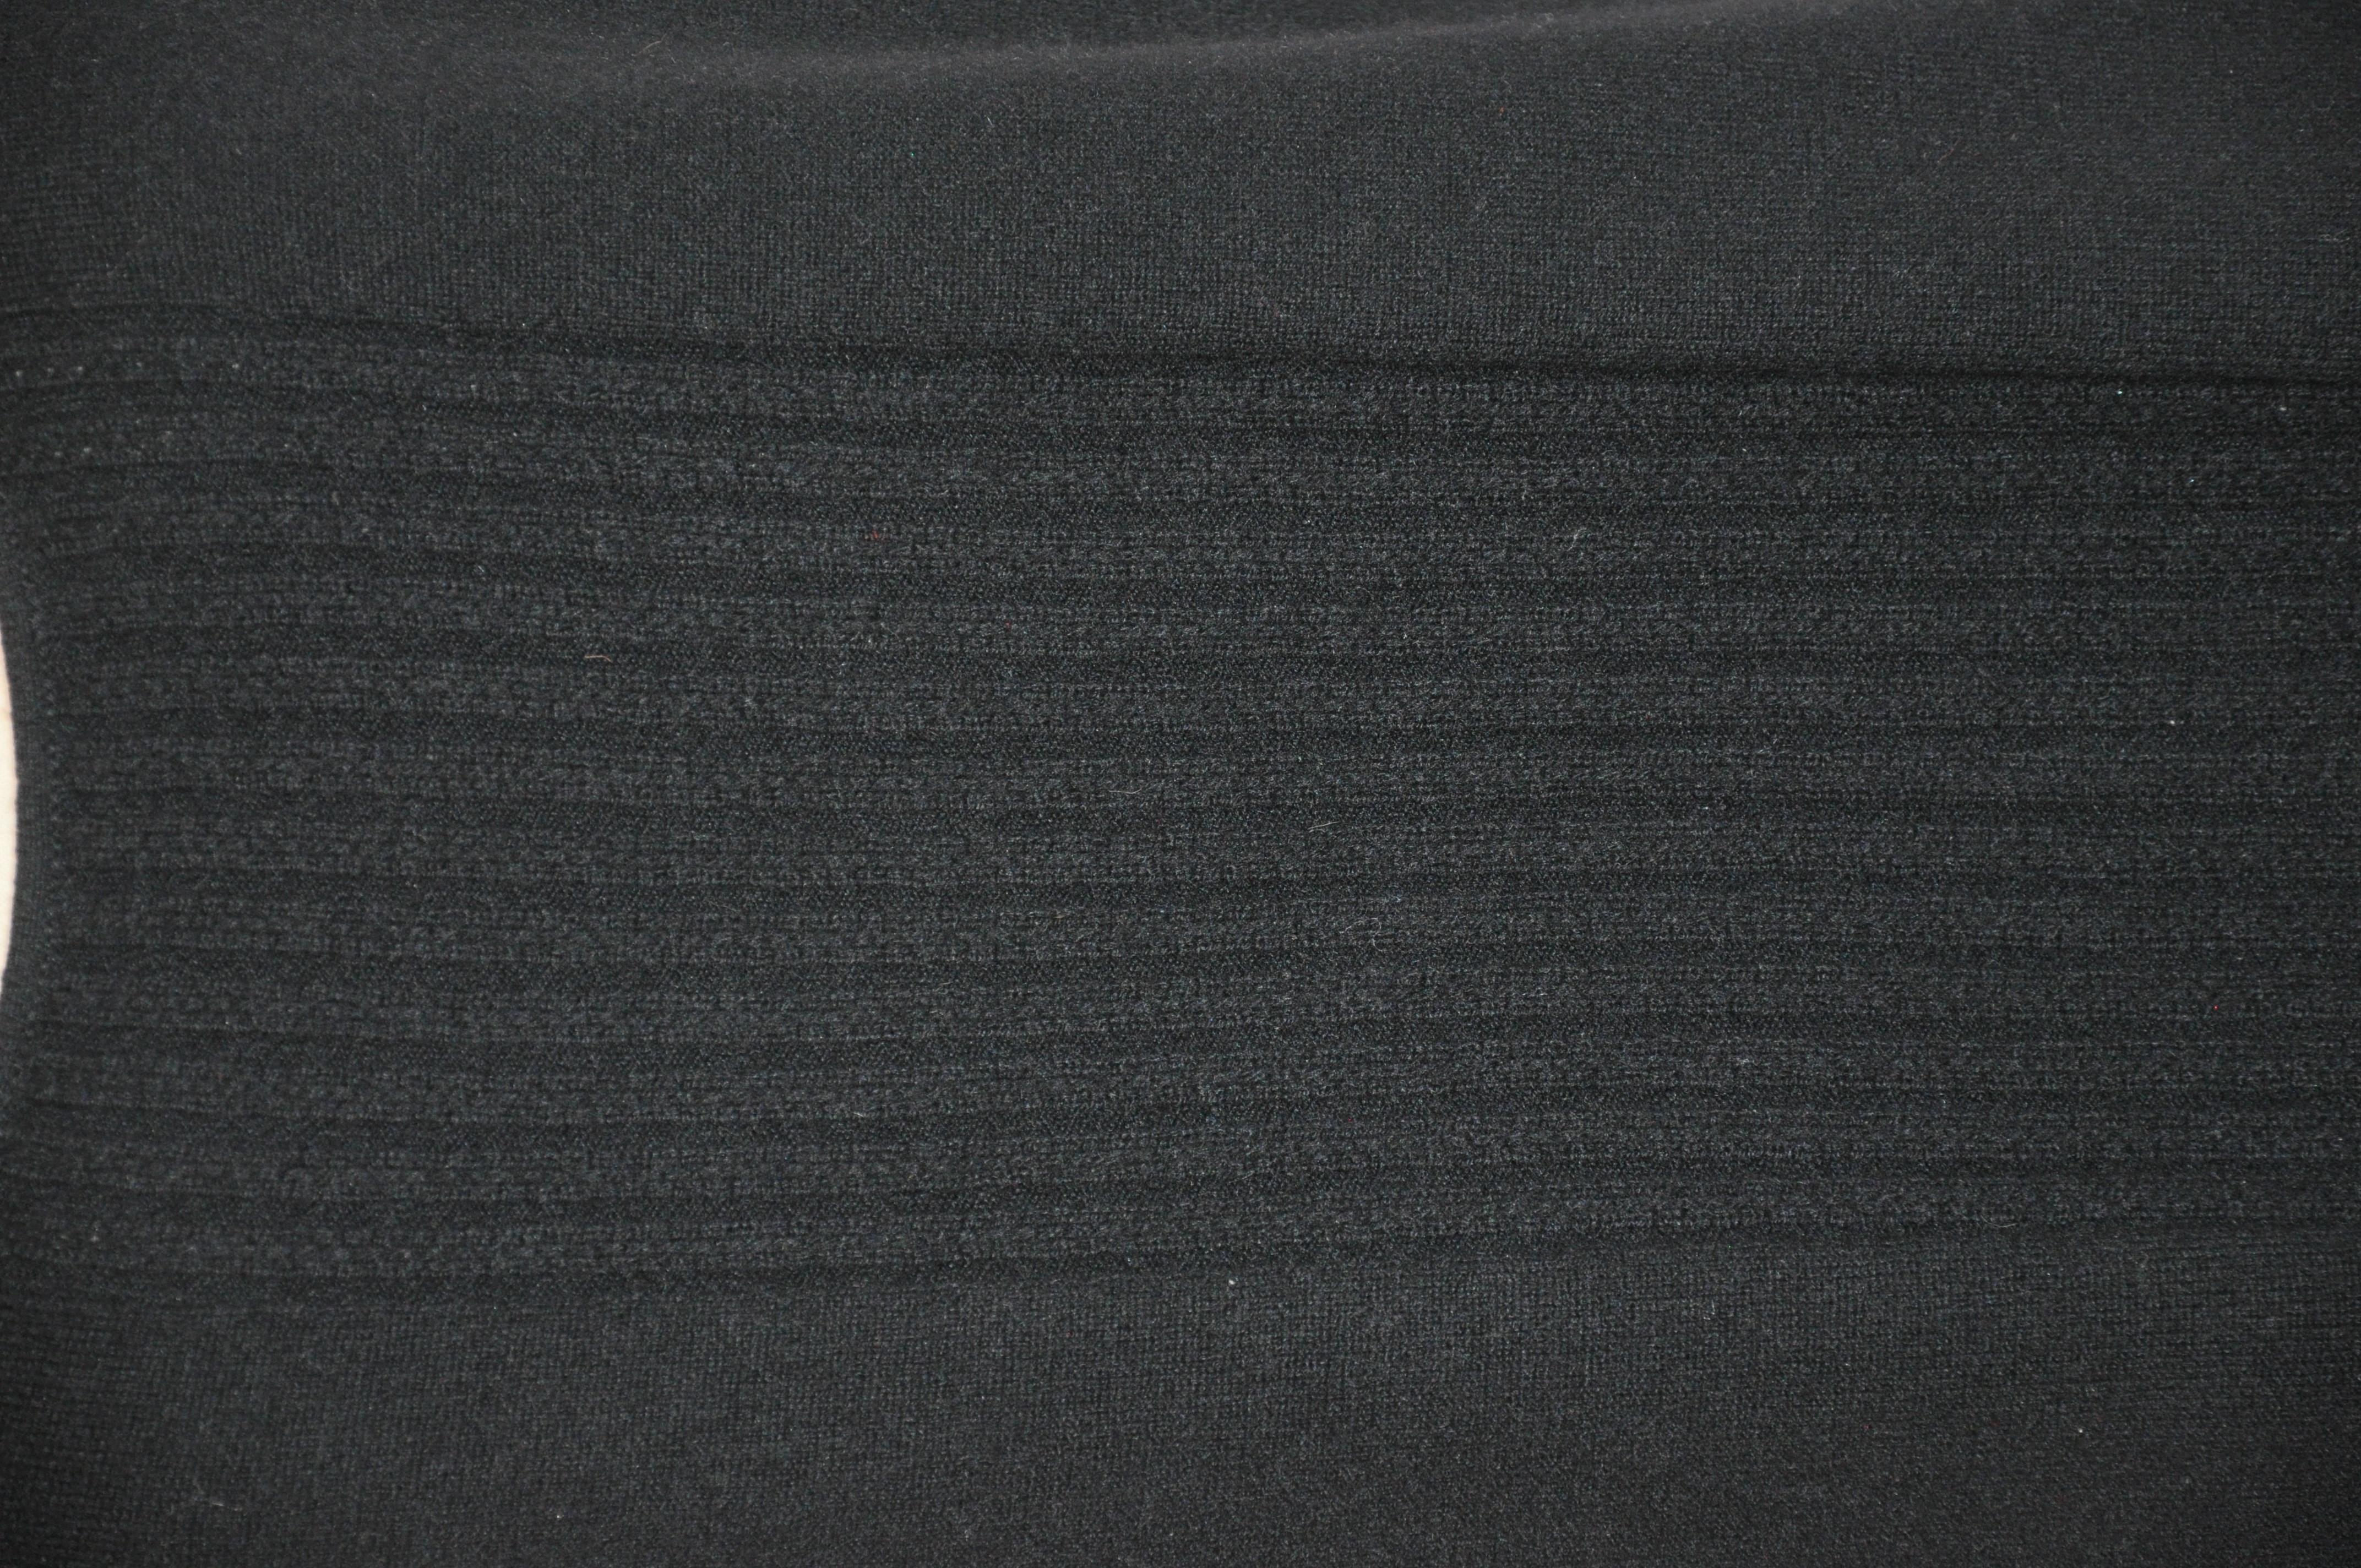 TSE wonderfully soft black 2-ply cable center cashmere tank top measures 18 1/2 inches in length in front, and 24 1/4 inches in length in back. Underarm measures 35 inches, waist is 37 inches, hem is 39 inches. Please note: measurements are taken at